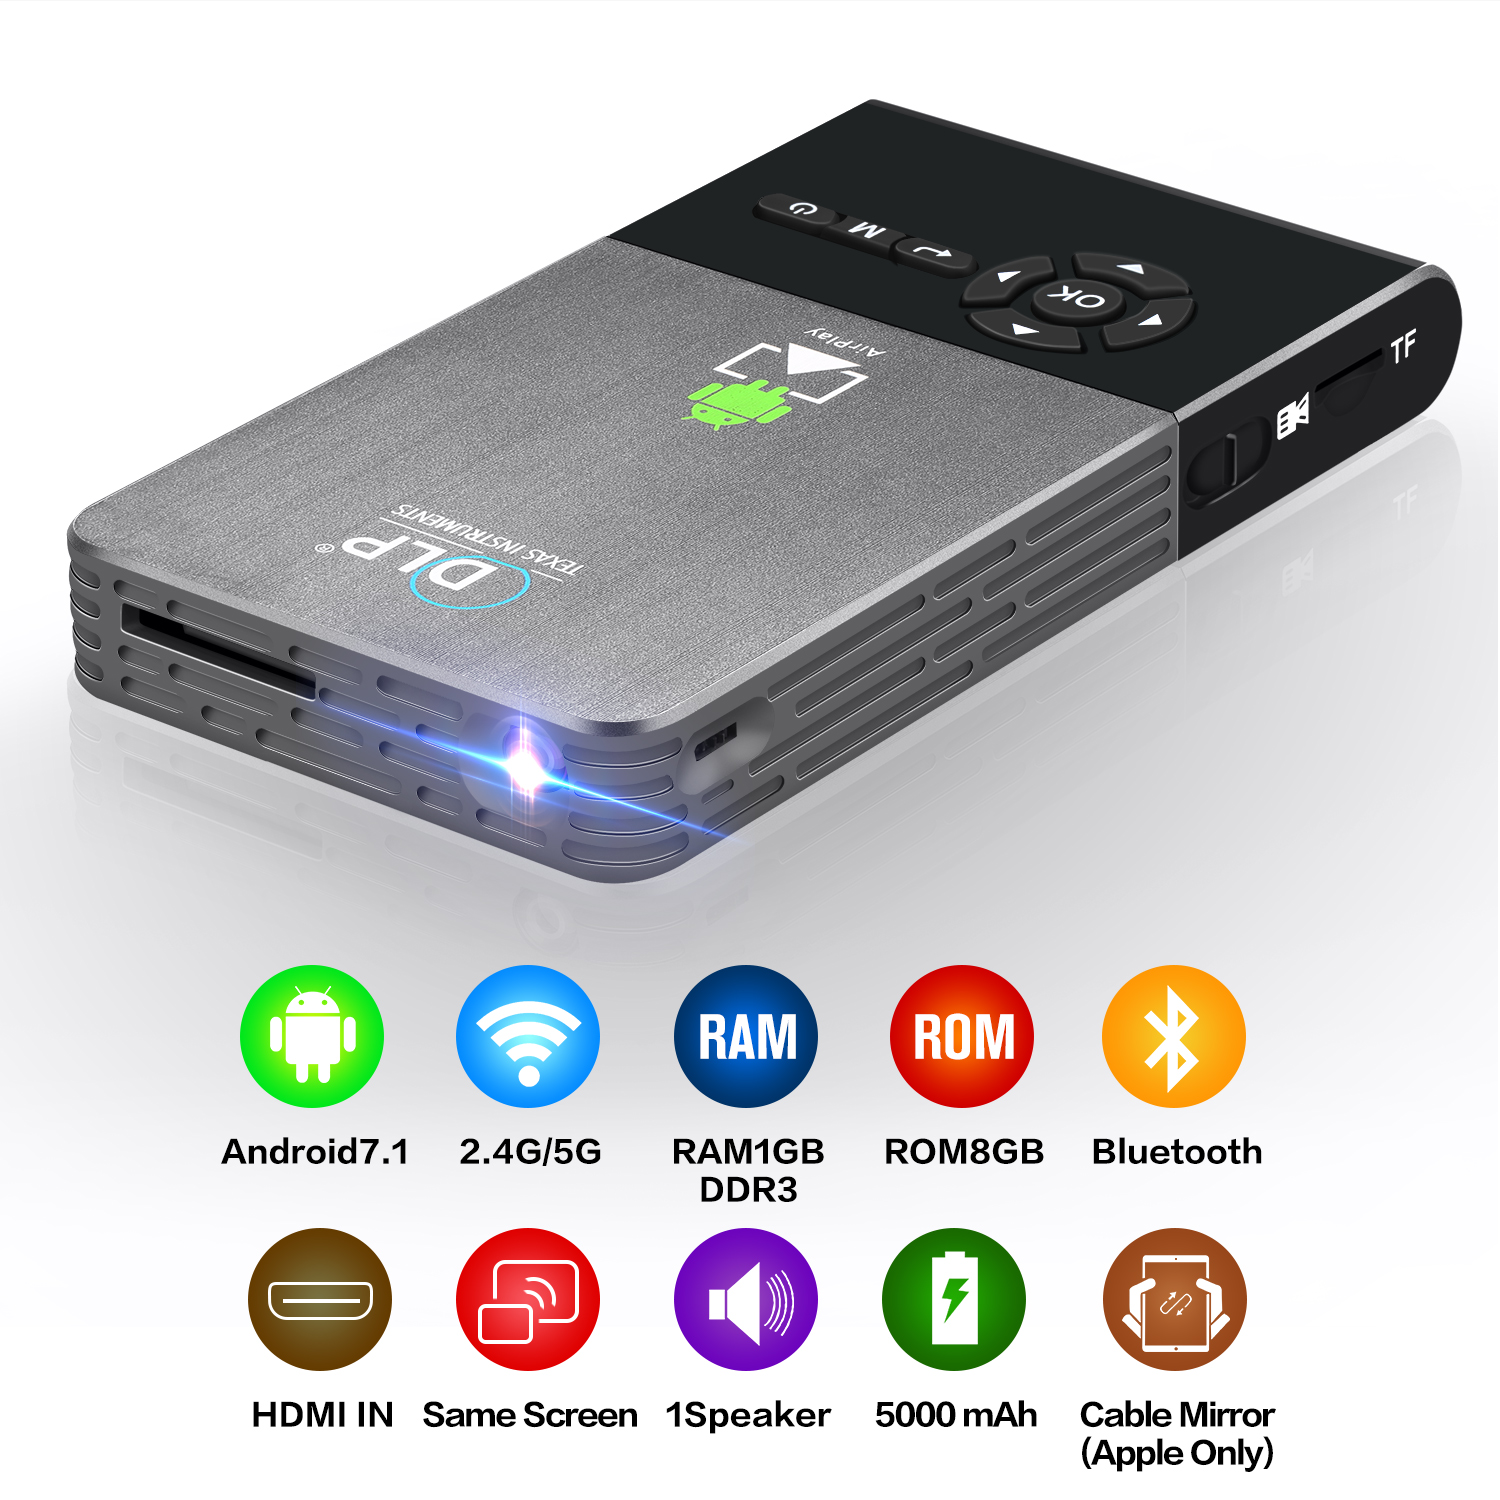 DLP Video Projector HD Pocket Projector Wireless WIFI Pico Projector with Build in Battery Support 1080P Android iOS Smartphone FC300 Techstick Mini Projector DLP Projector